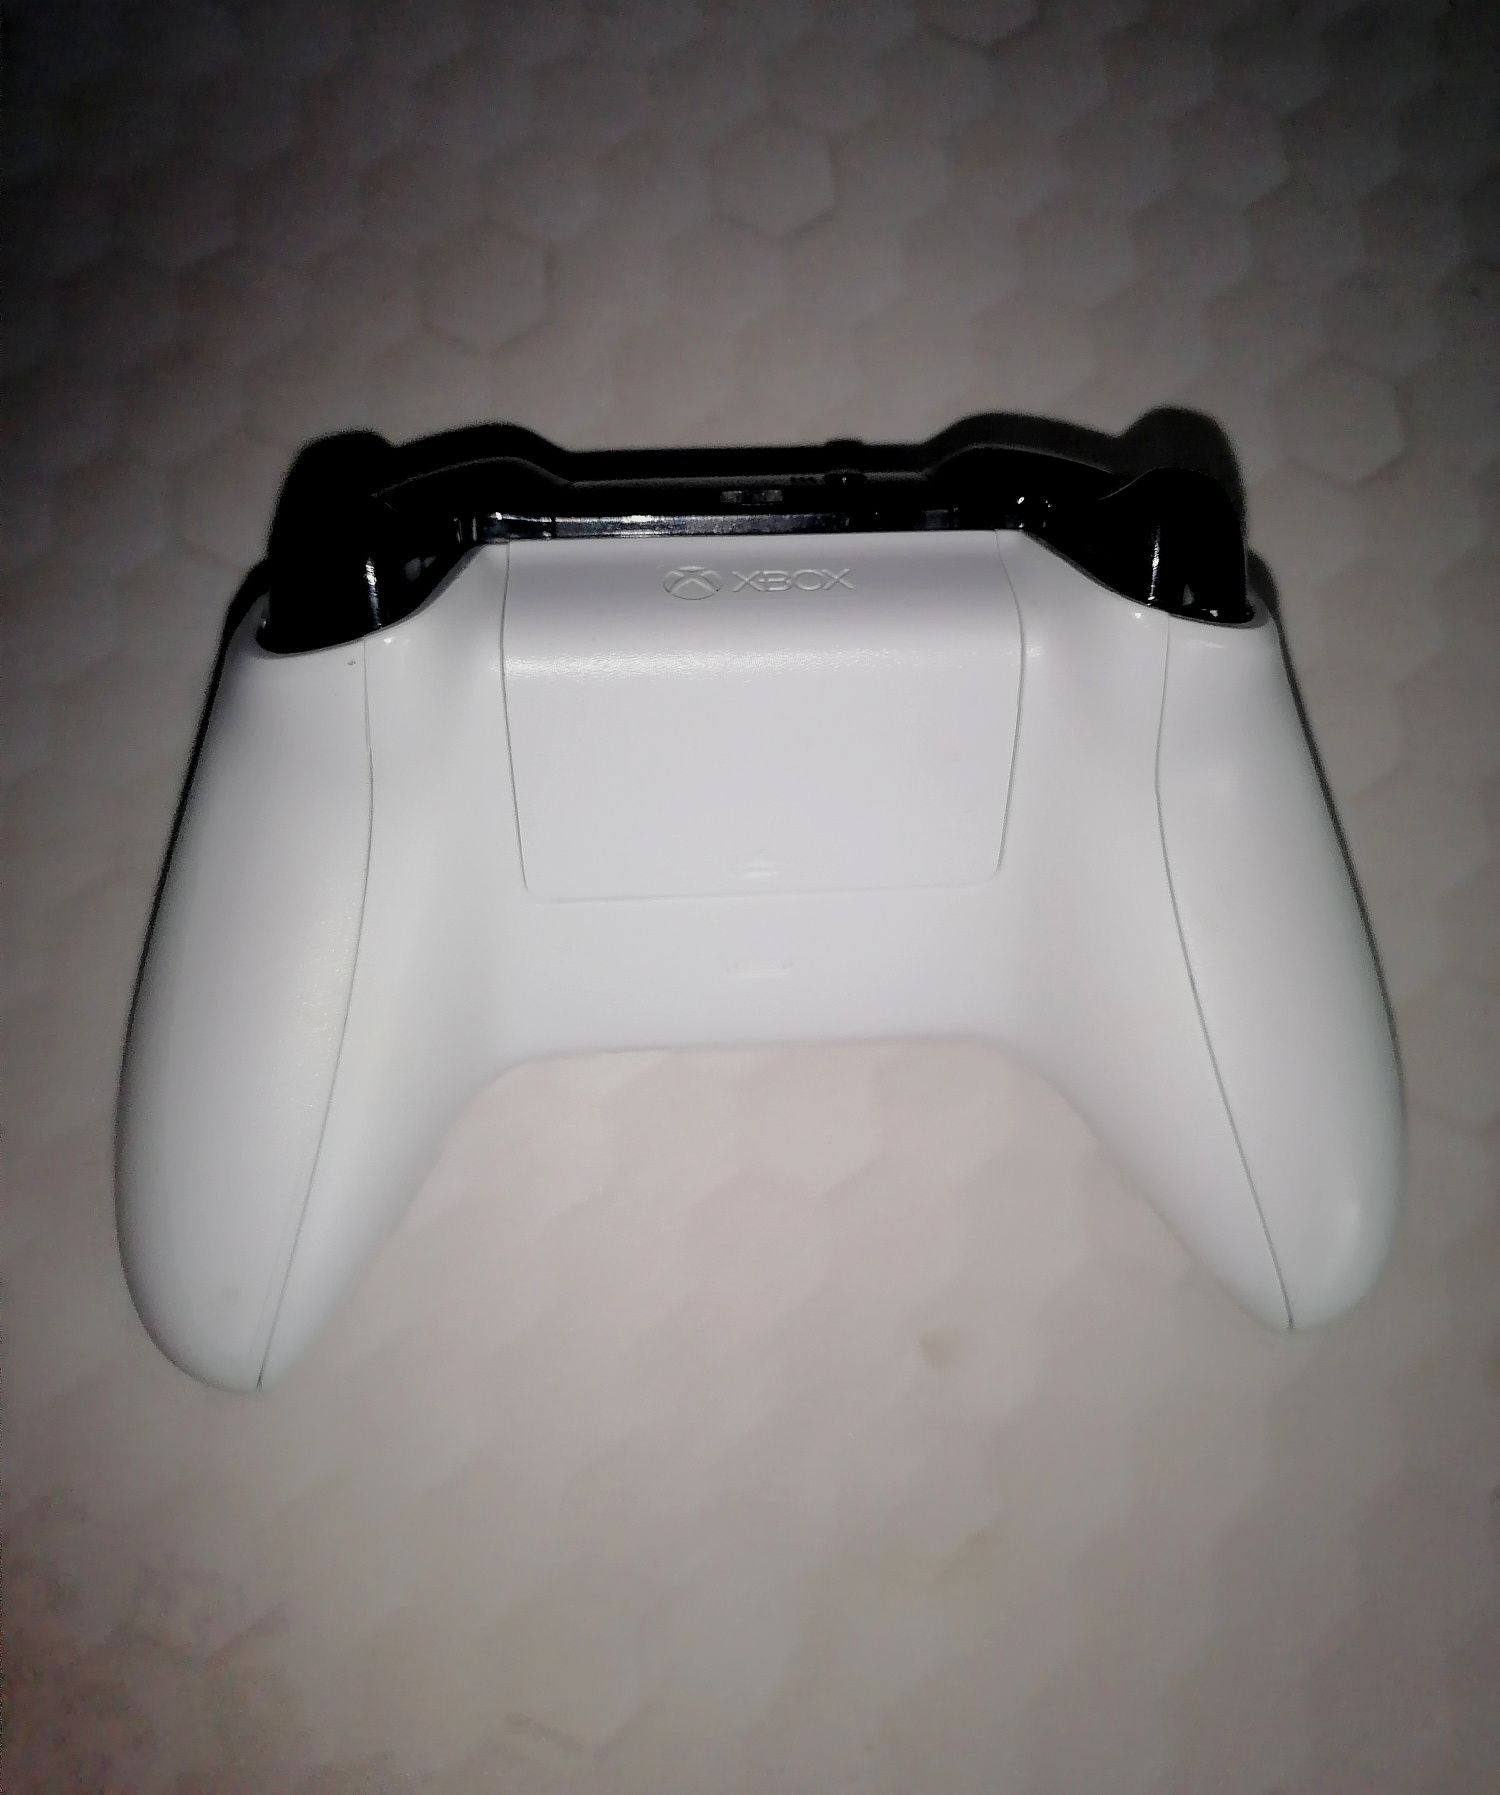 Vând controller Xbox One S alb perfect funcțional